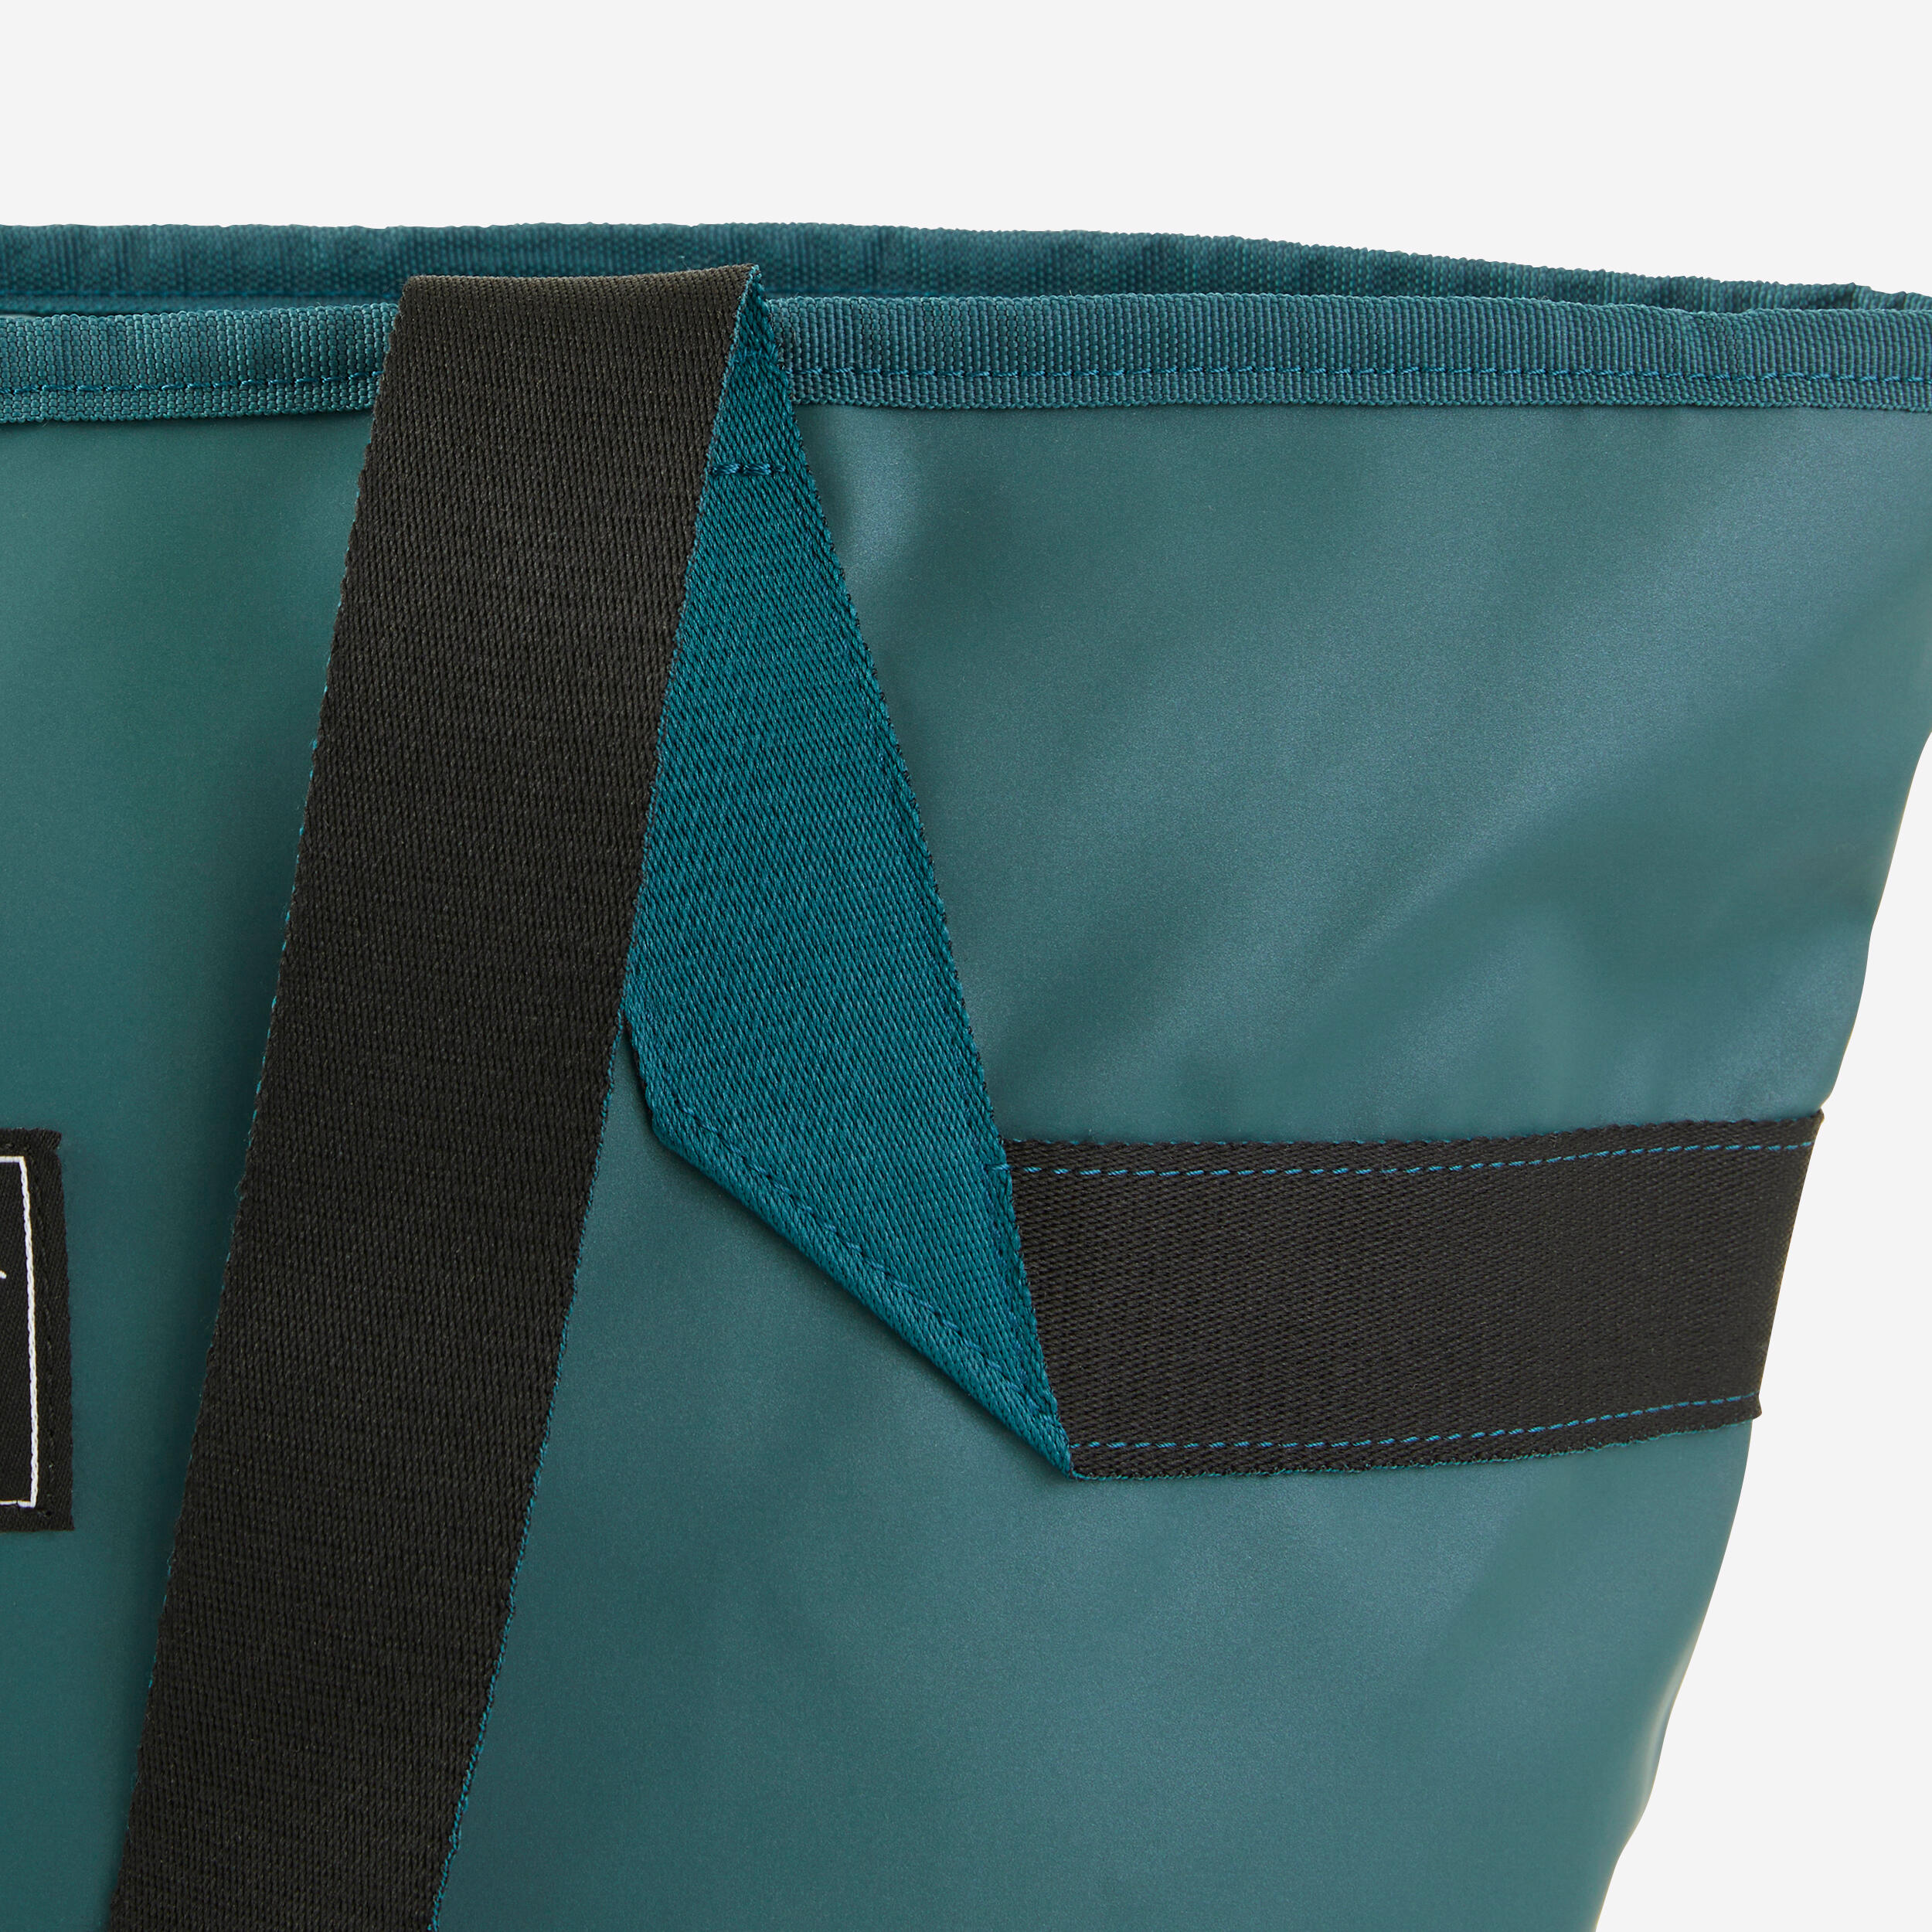 Women's 25 L Bag with Pockets - Turquoise 8/9